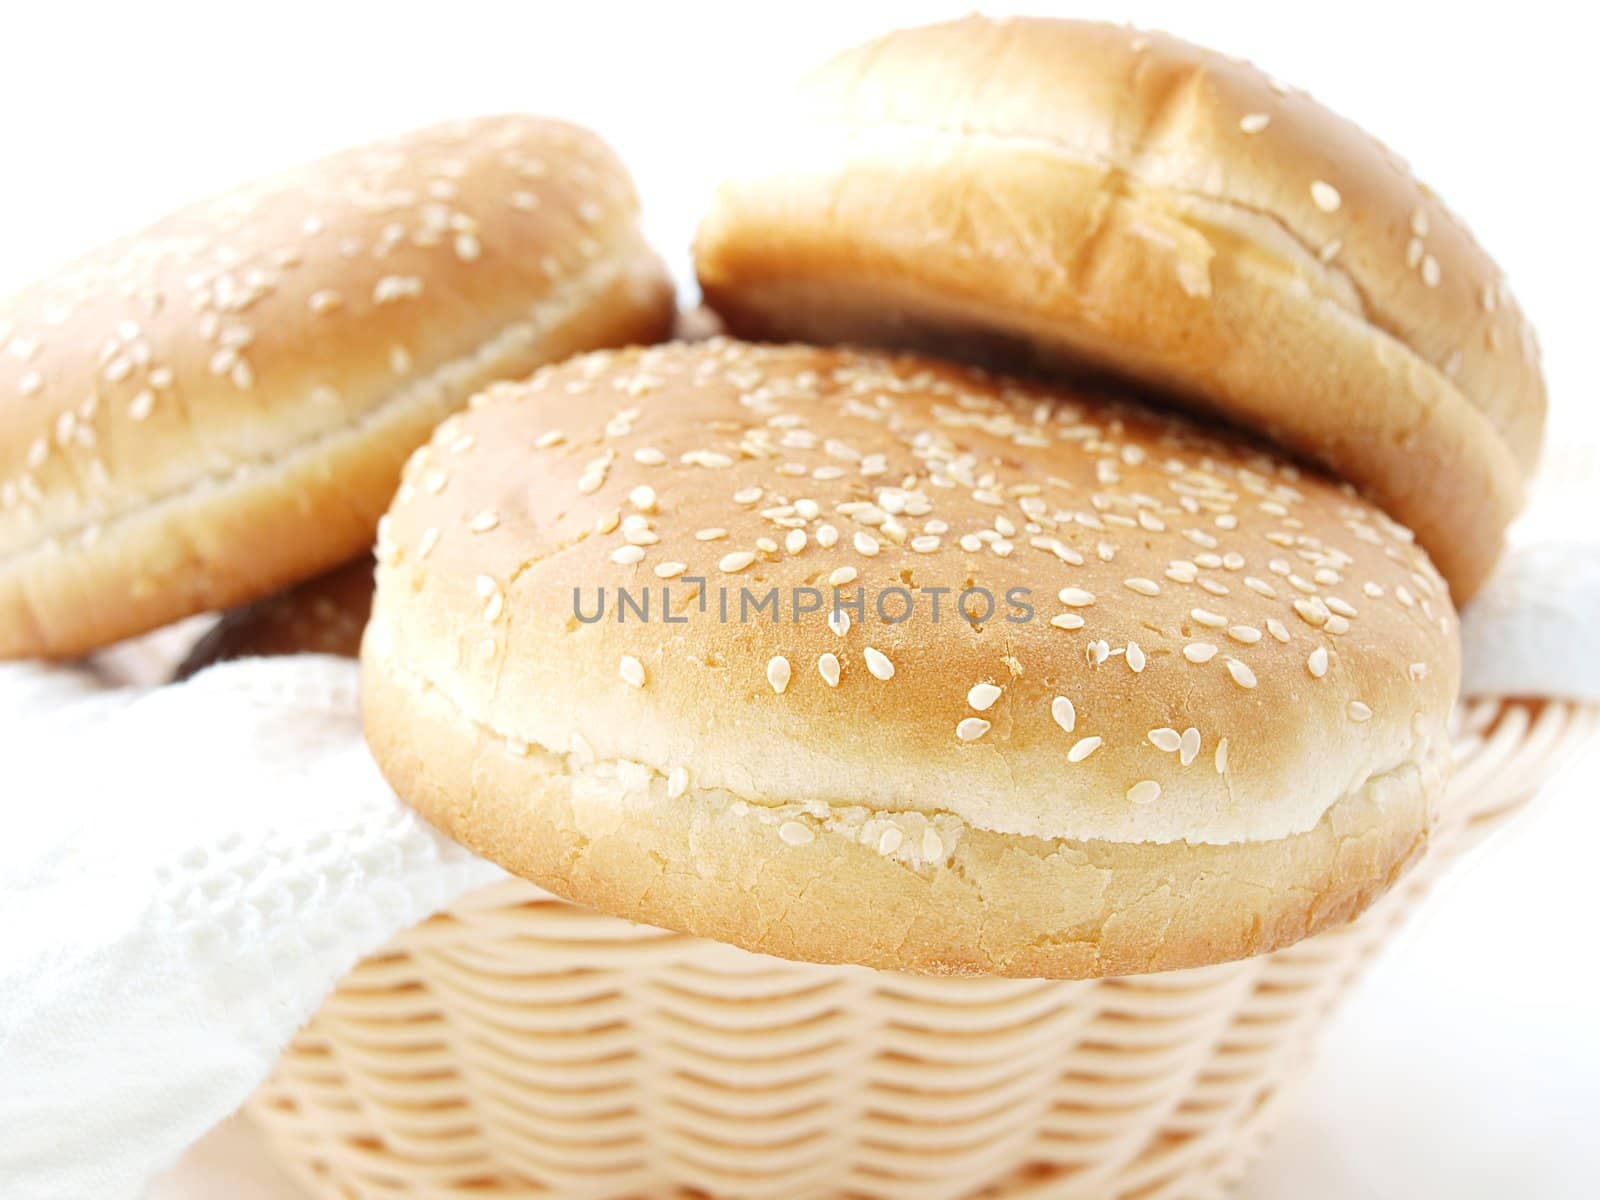 Hamburger buns in wooden basket, with a white towle towards white